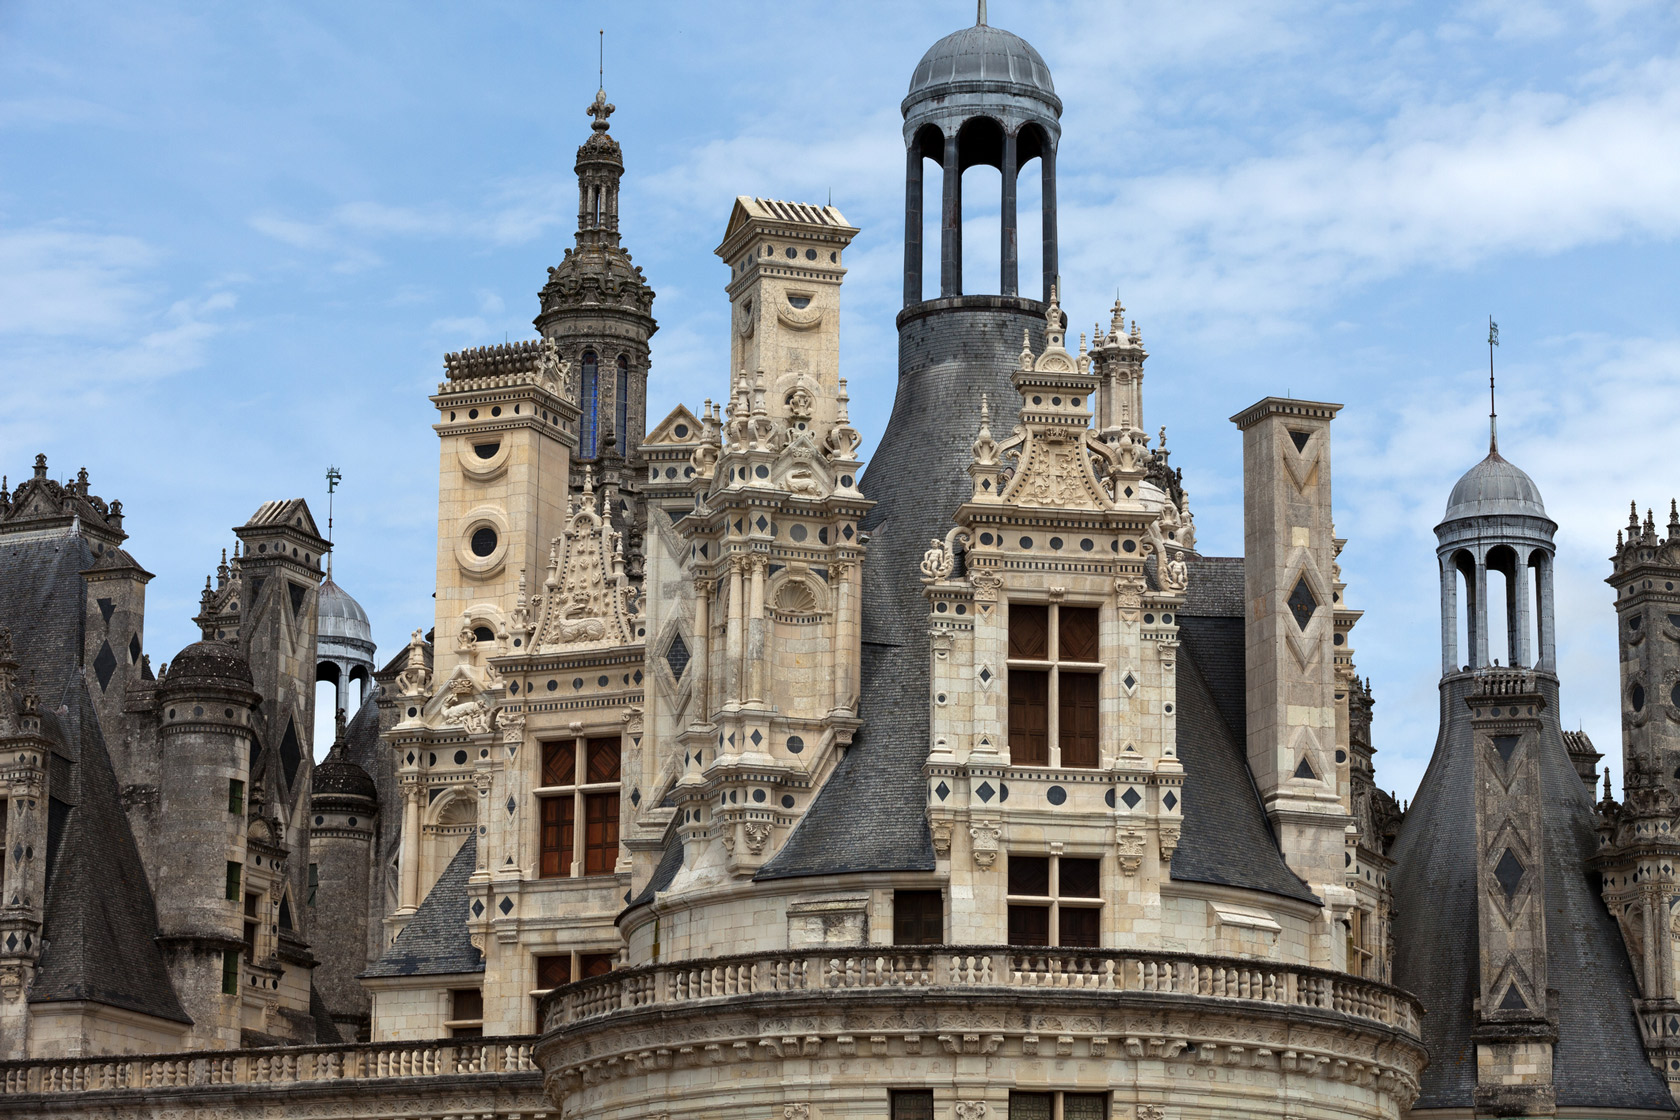 Chambord Castle. Built as a hunting lodge for King Francois I, between 1519 and 1539, this castle is the largest and most frequented of the Loire Valley.